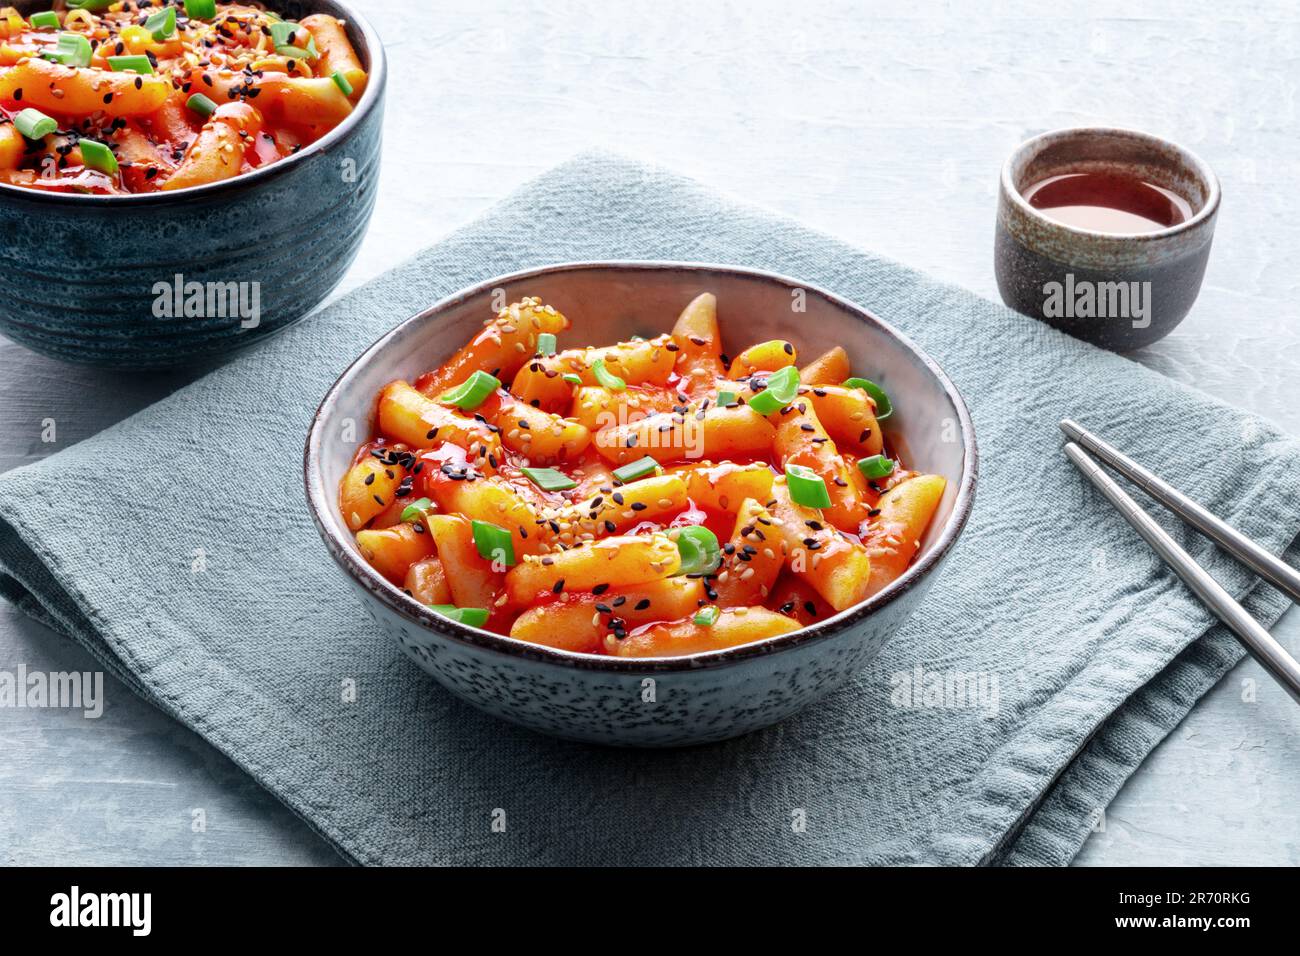 https://c8.alamy.com/comp/2R70RKG/tteokbokki-or-topokki-and-rabokki-korean-street-food-spicy-rice-cakes-in-red-pepper-gochujang-sauce-a-popular-dish-with-a-drink-2R70RKG.jpg